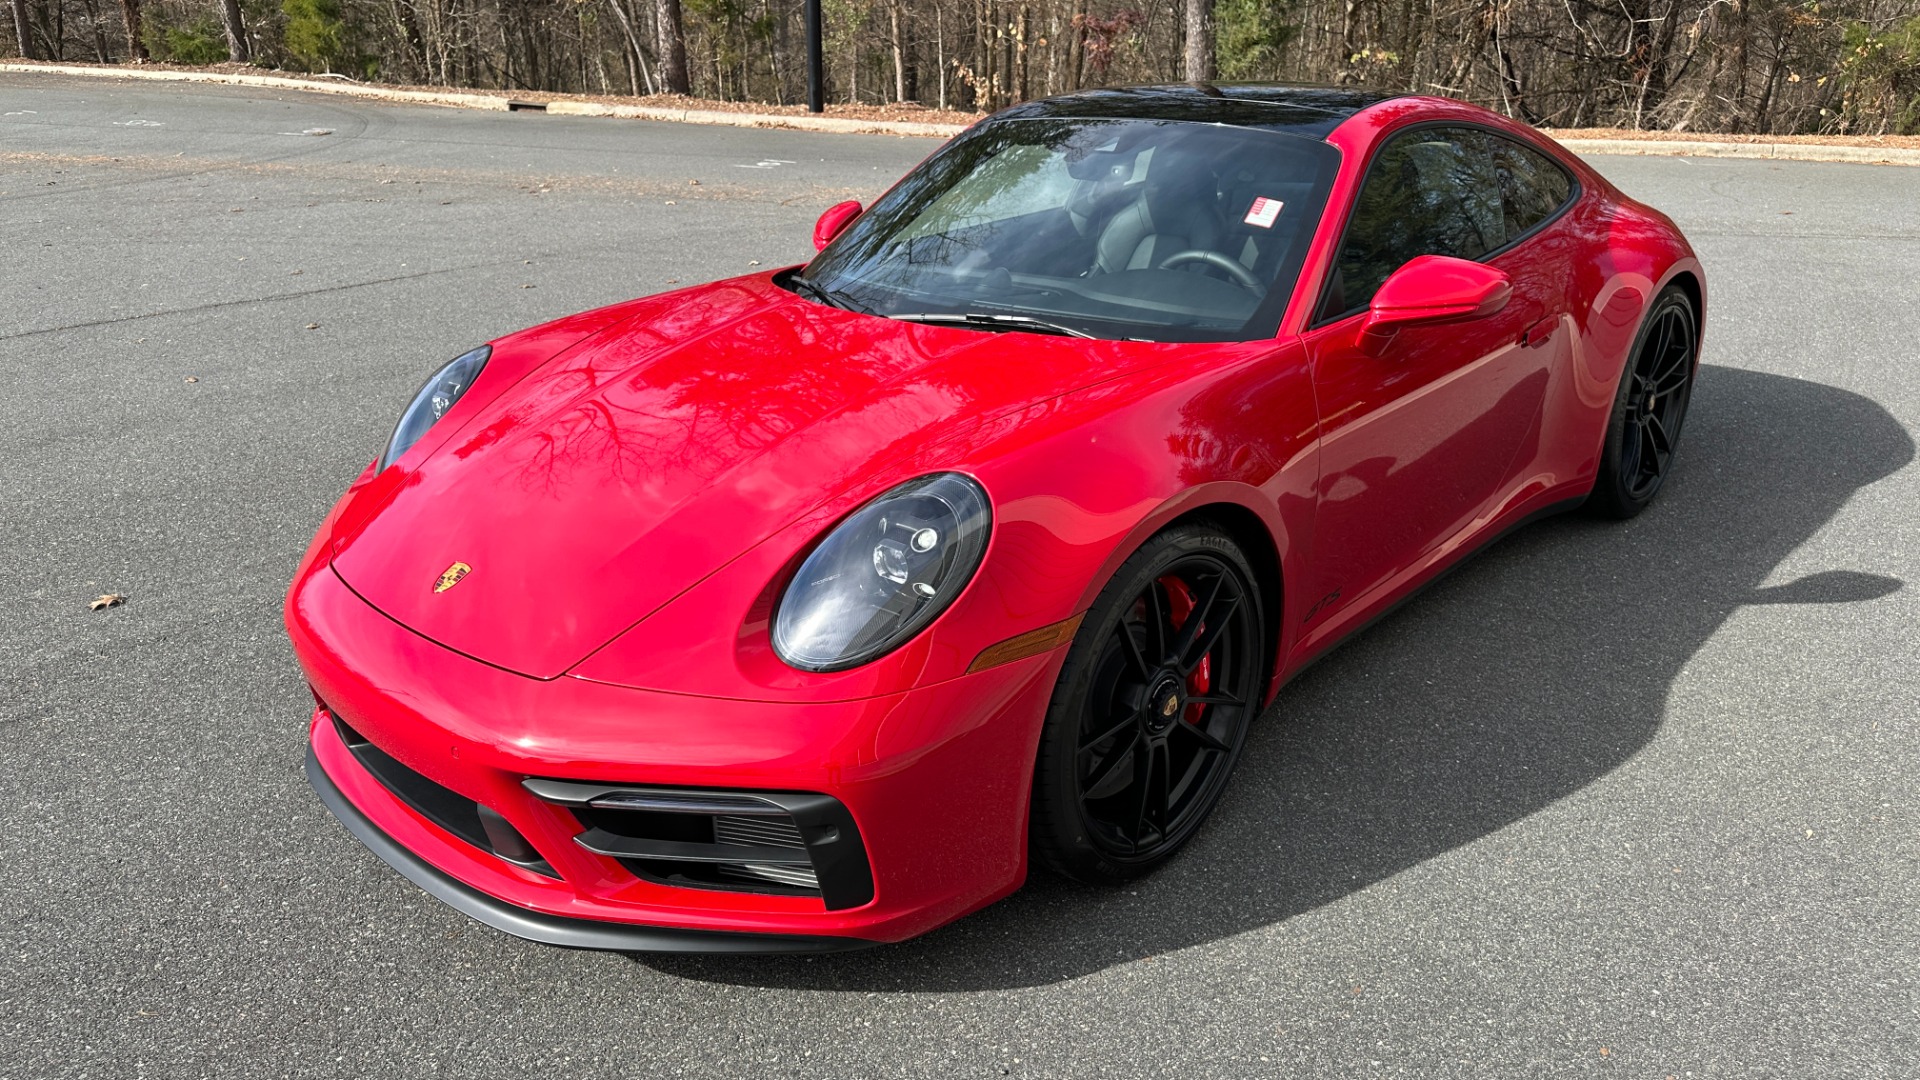 Used 2023 Porsche 911 CARRERA GTS / 18 WAY SPORT SEATS / FRONT LIFT / REAR AXLE STEERING for sale $181,900 at Formula Imports in Charlotte NC 28227 2